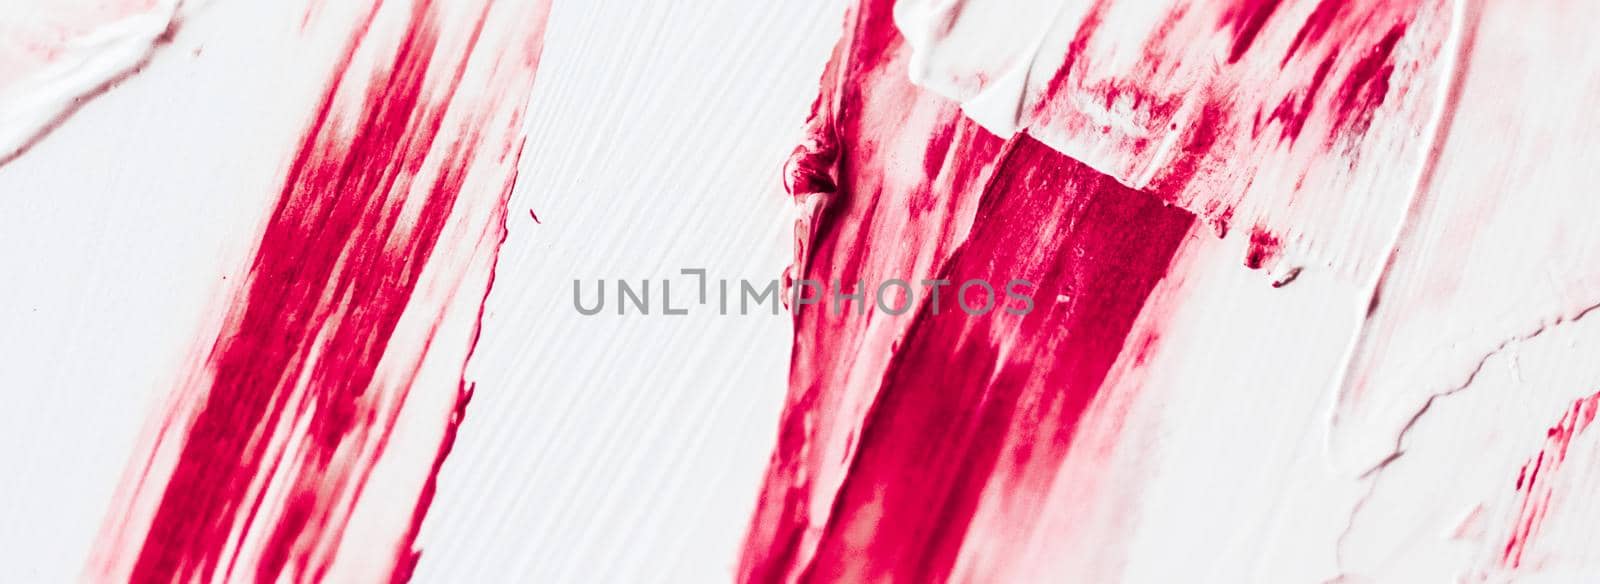 Artistic abstract texture background, pink acrylic paint brush stroke, textured ink oil splash as print backdrop for luxury holiday brand, flatlay banner design by Anneleven